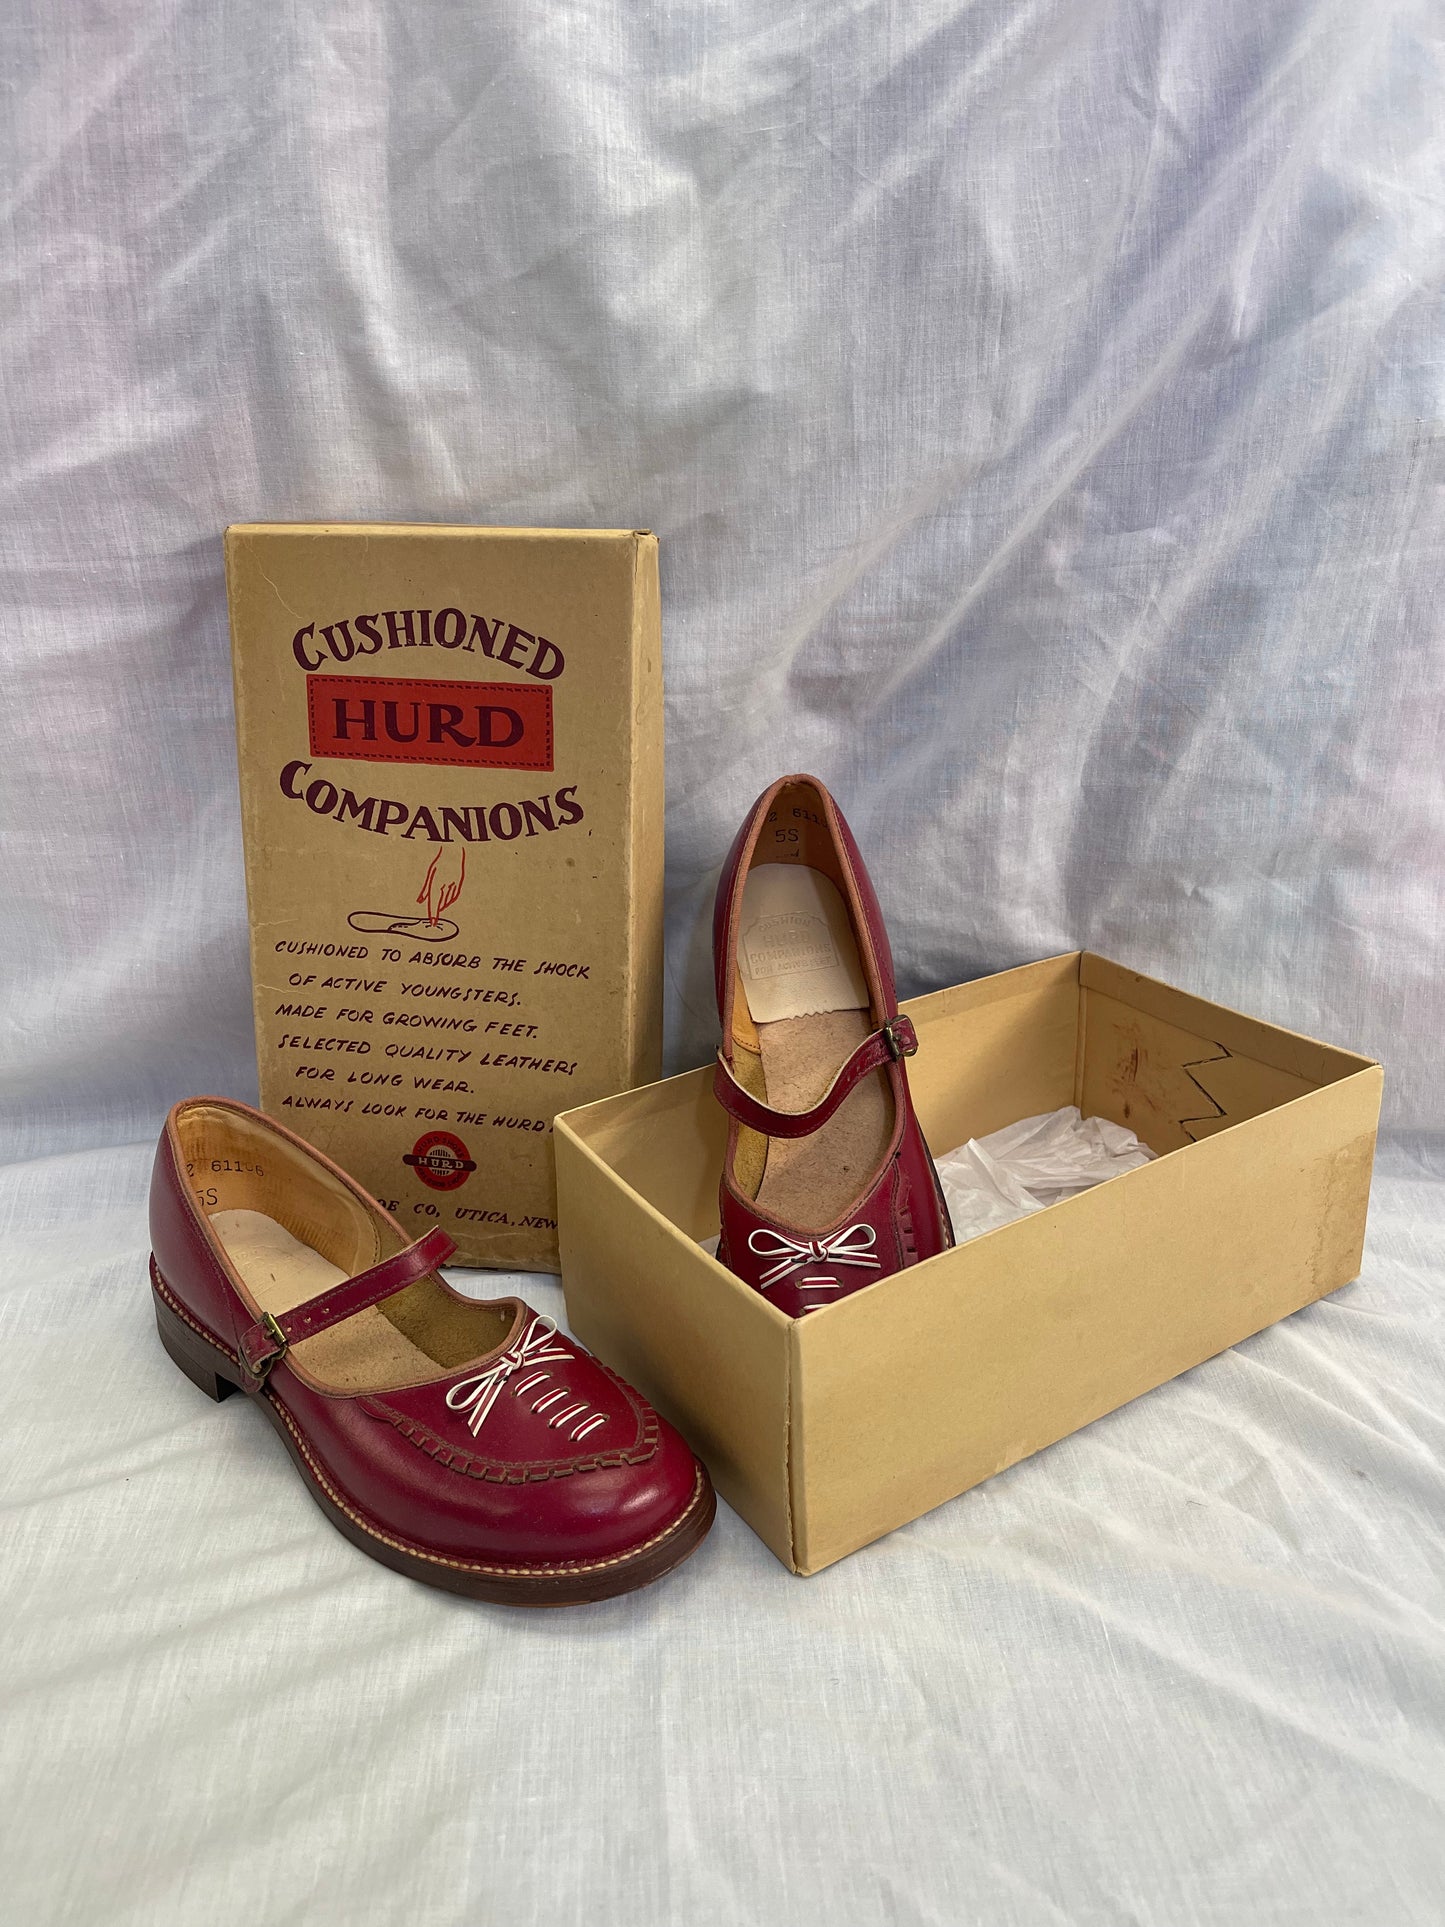 Hurd Companions Girl’s Red Leather Shoes